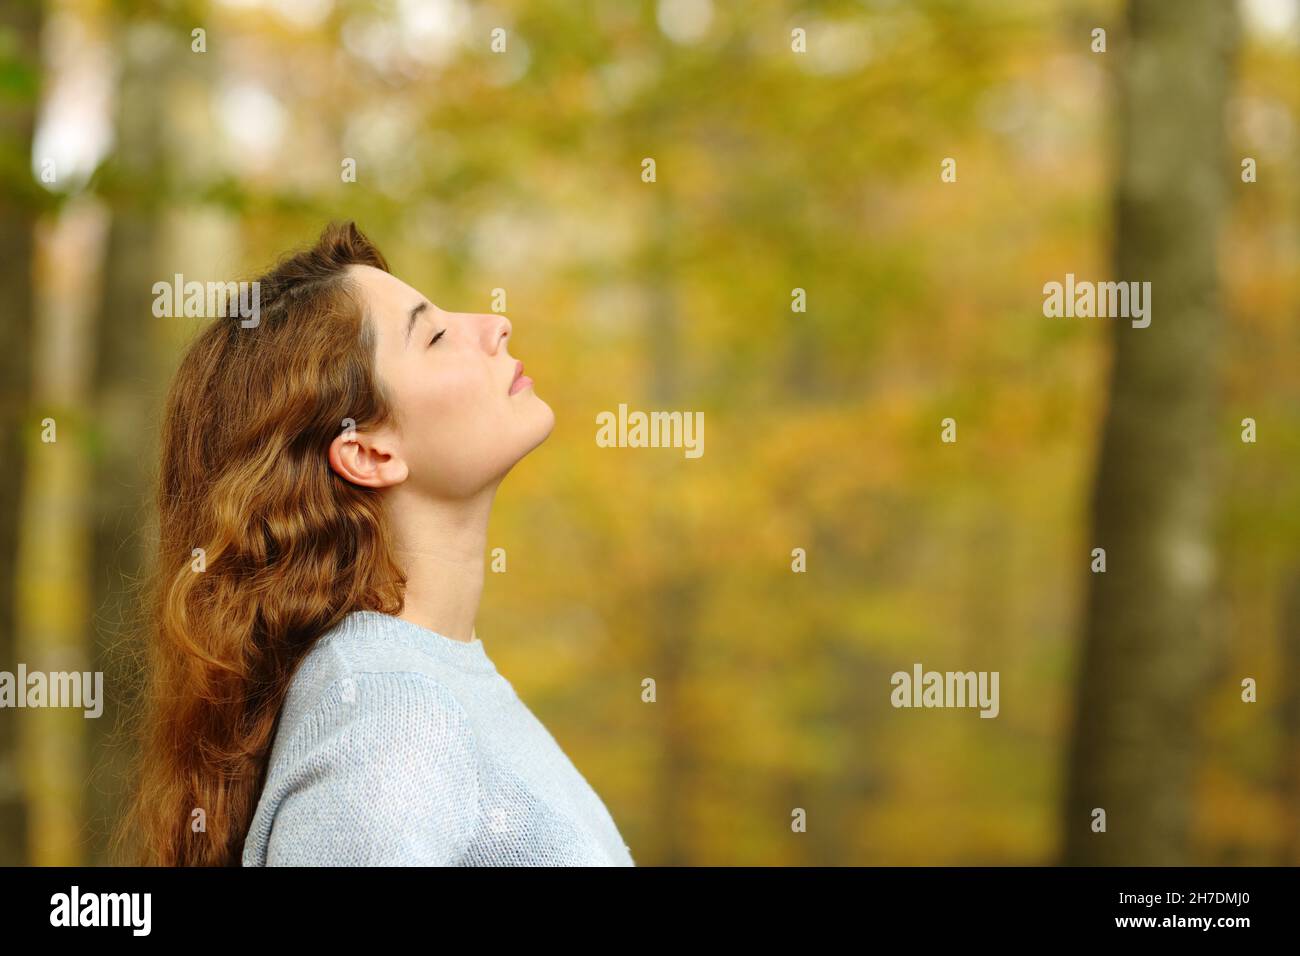 Woman profile relaxing breathing fresh air in a park Stock Photo